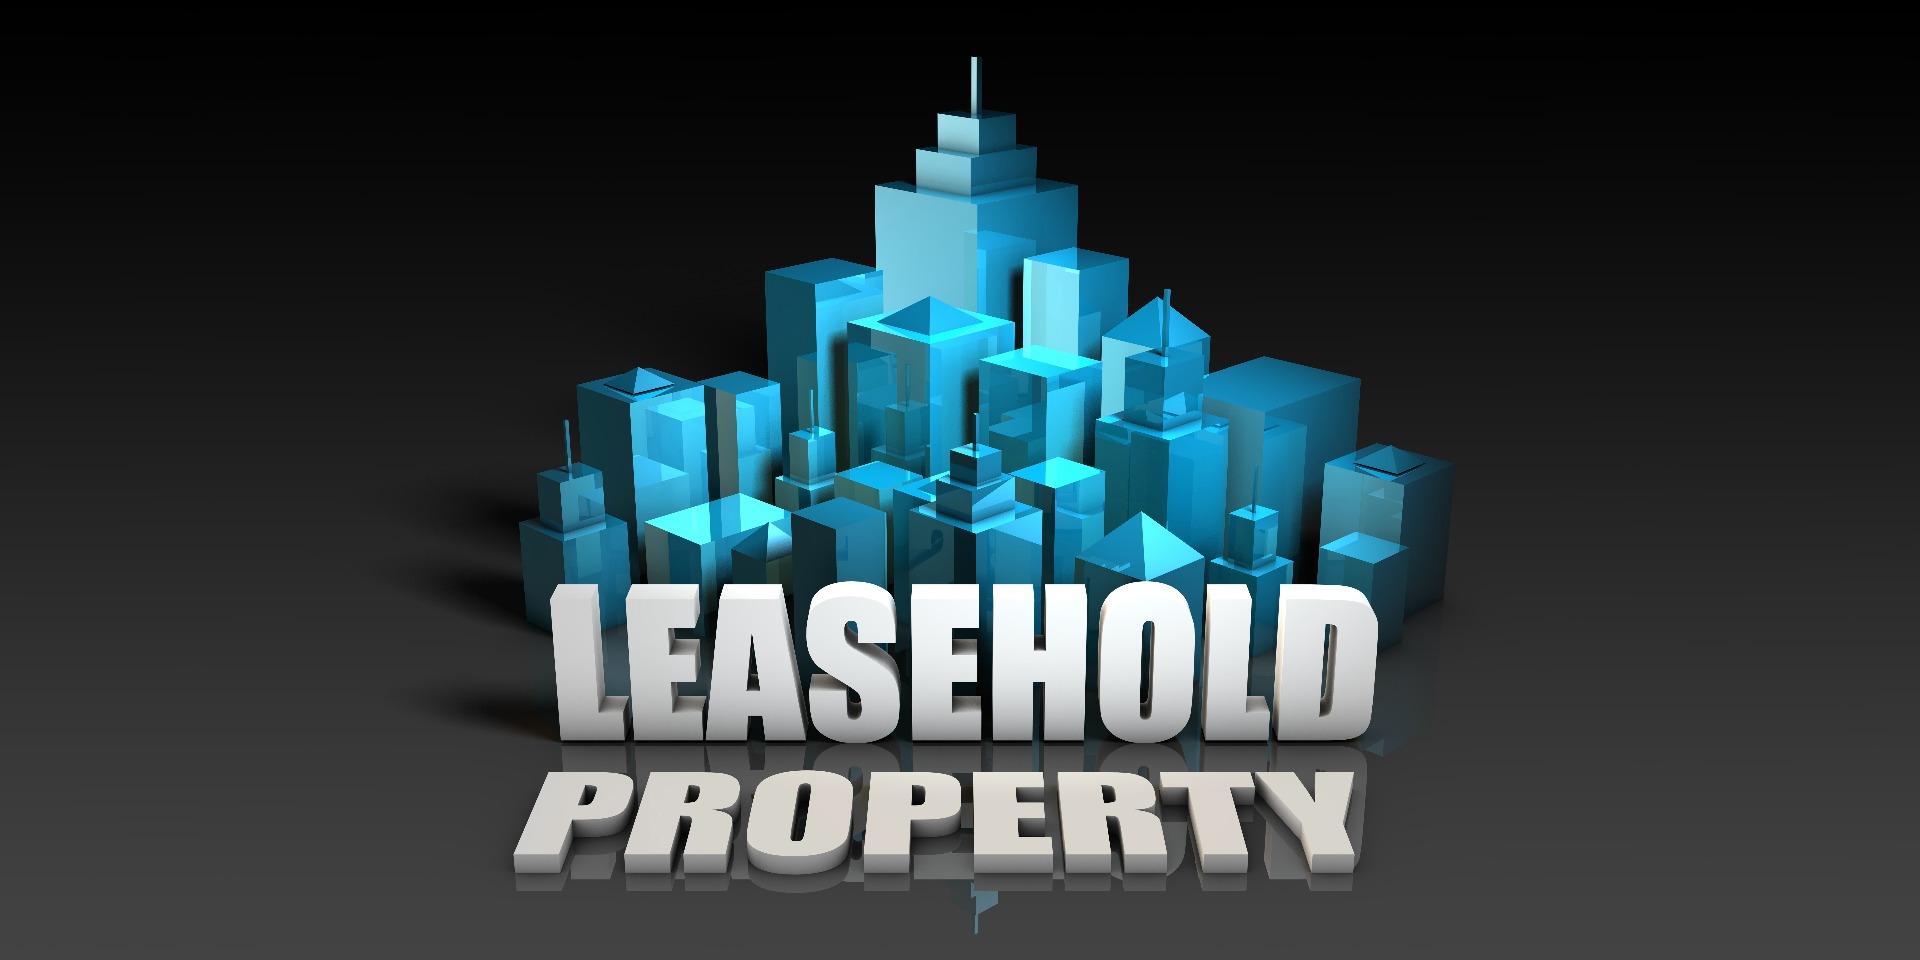 Leasehold Property.